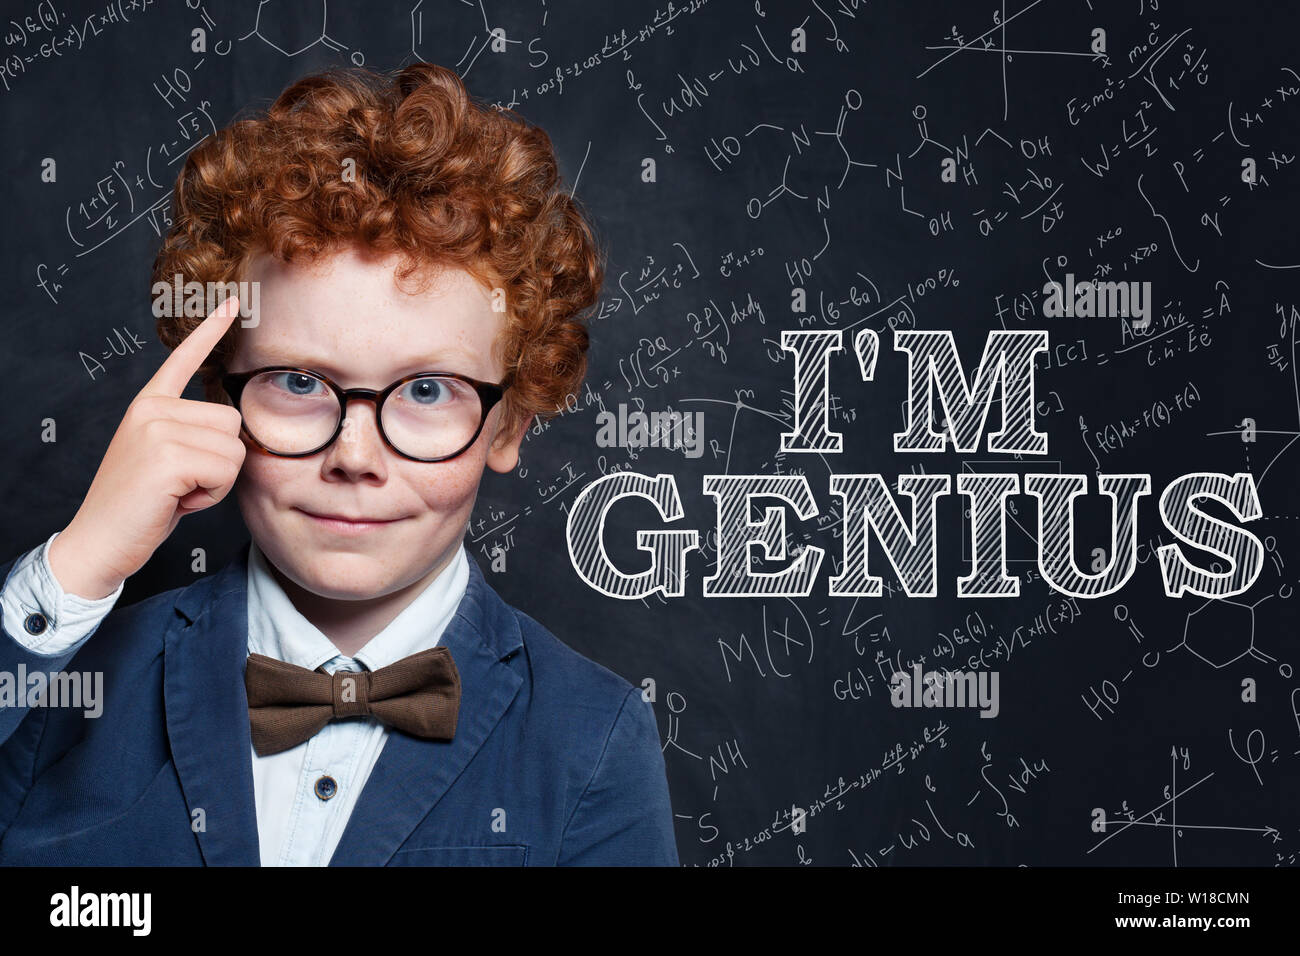 Genius child on blackboard background with science and maths formulas Stock Photo